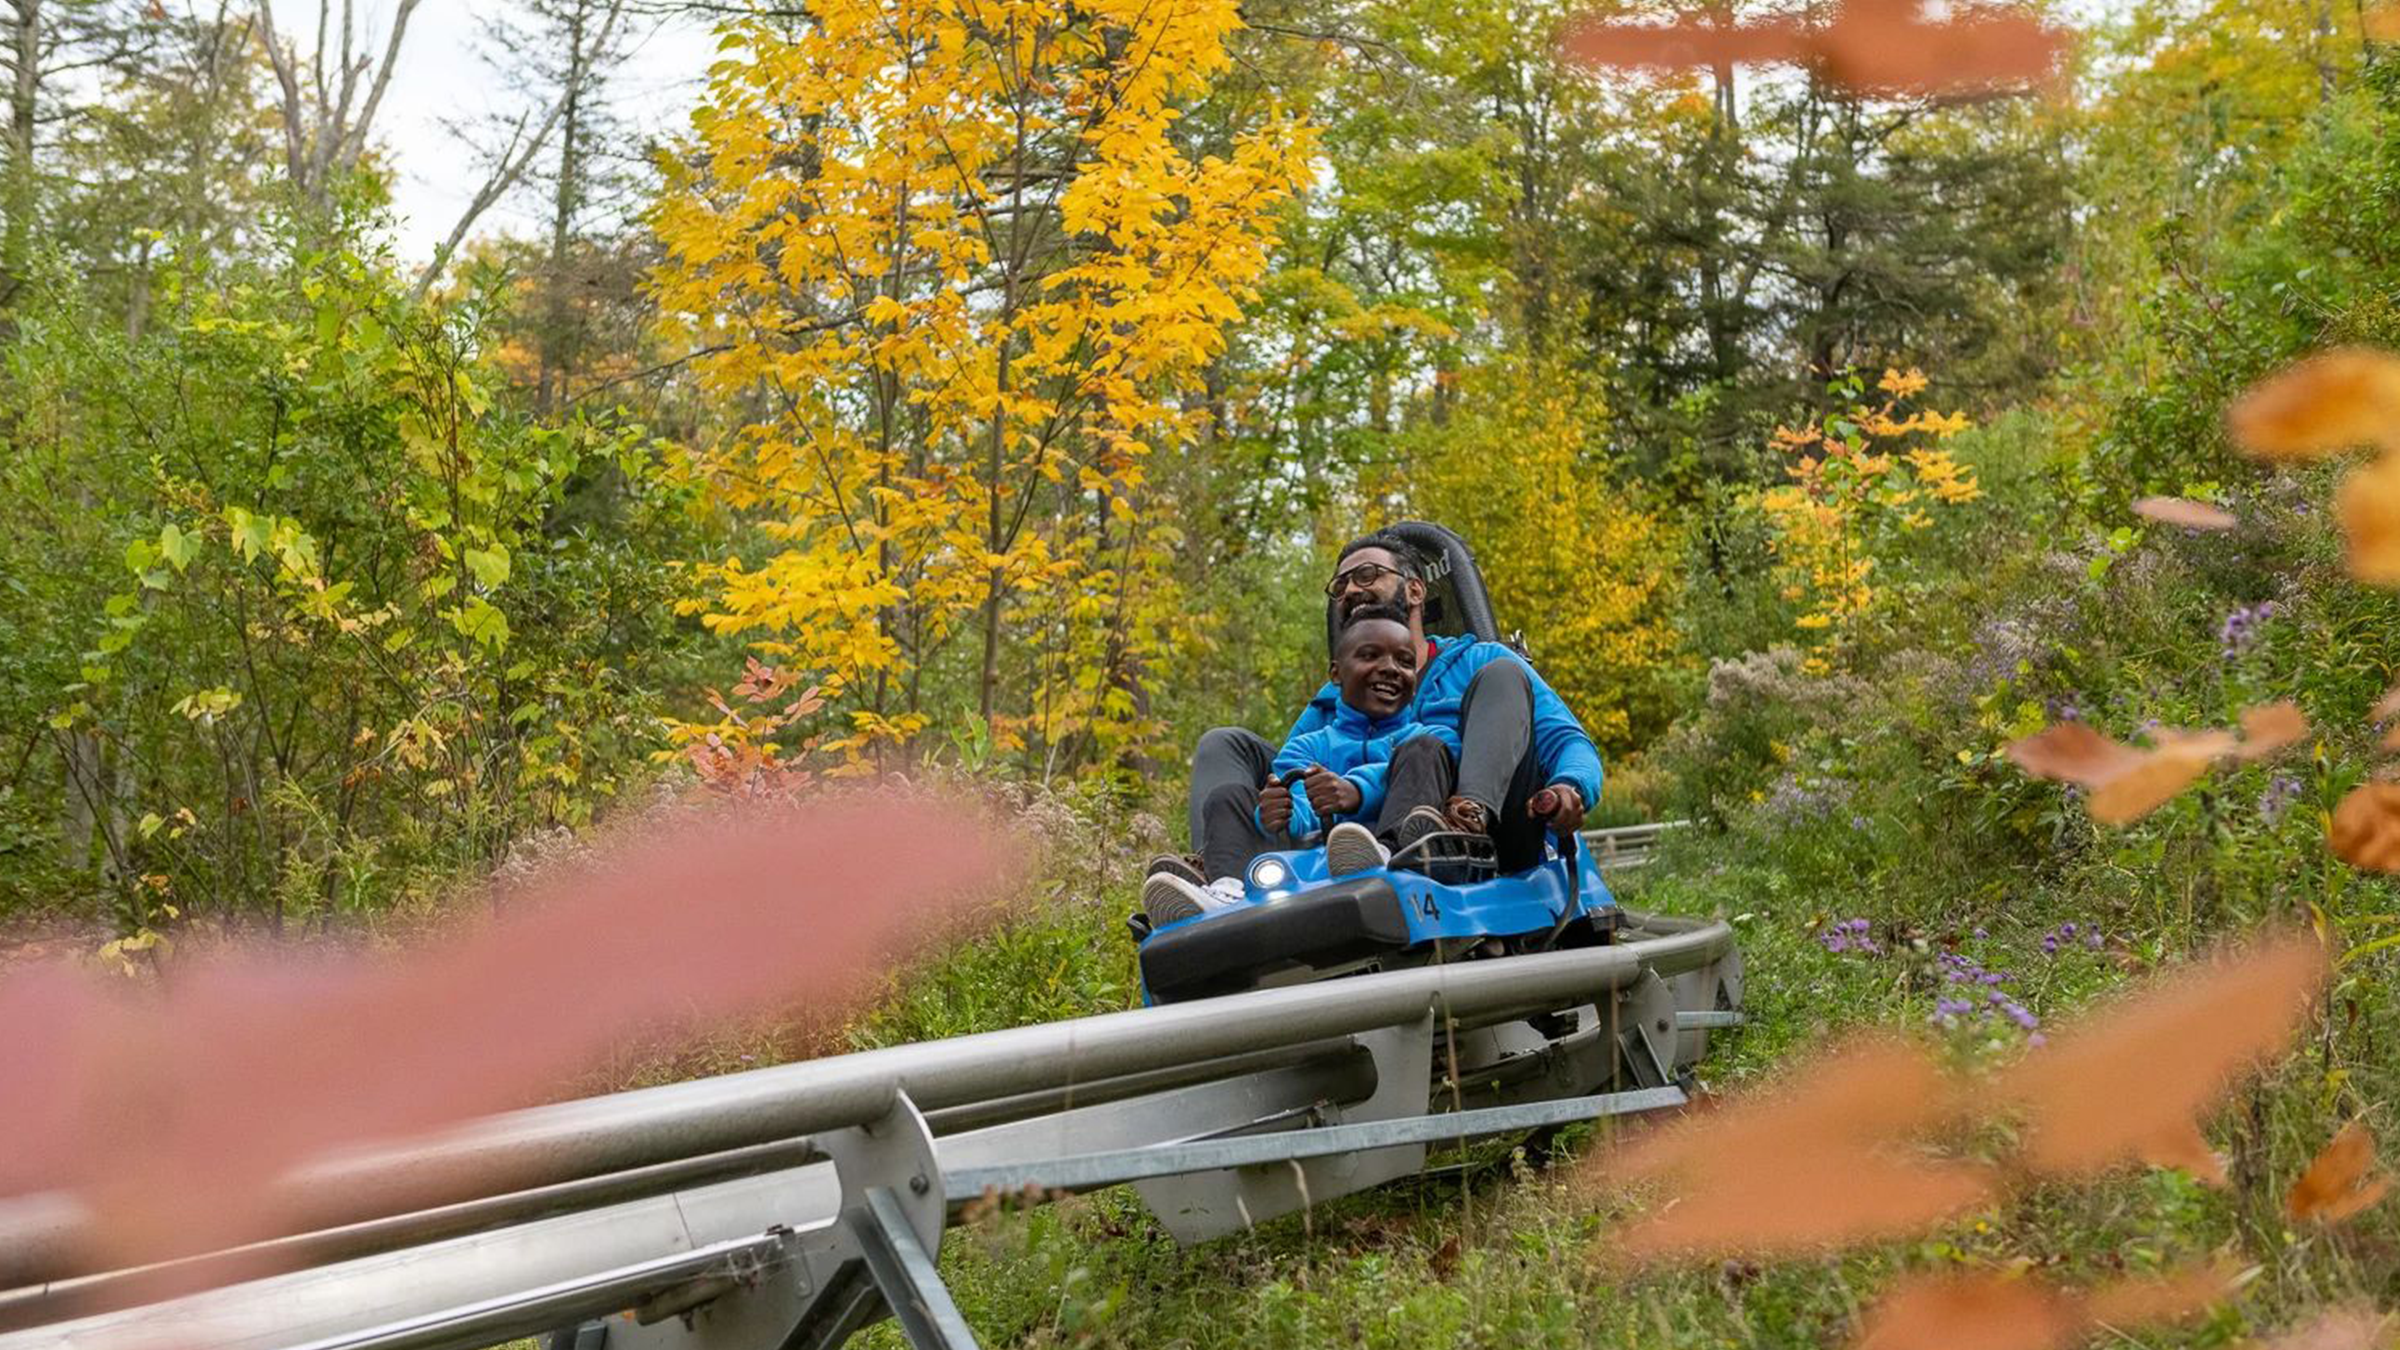 Two people riding the Ridgerunner rollercoaster at Blue Mountain